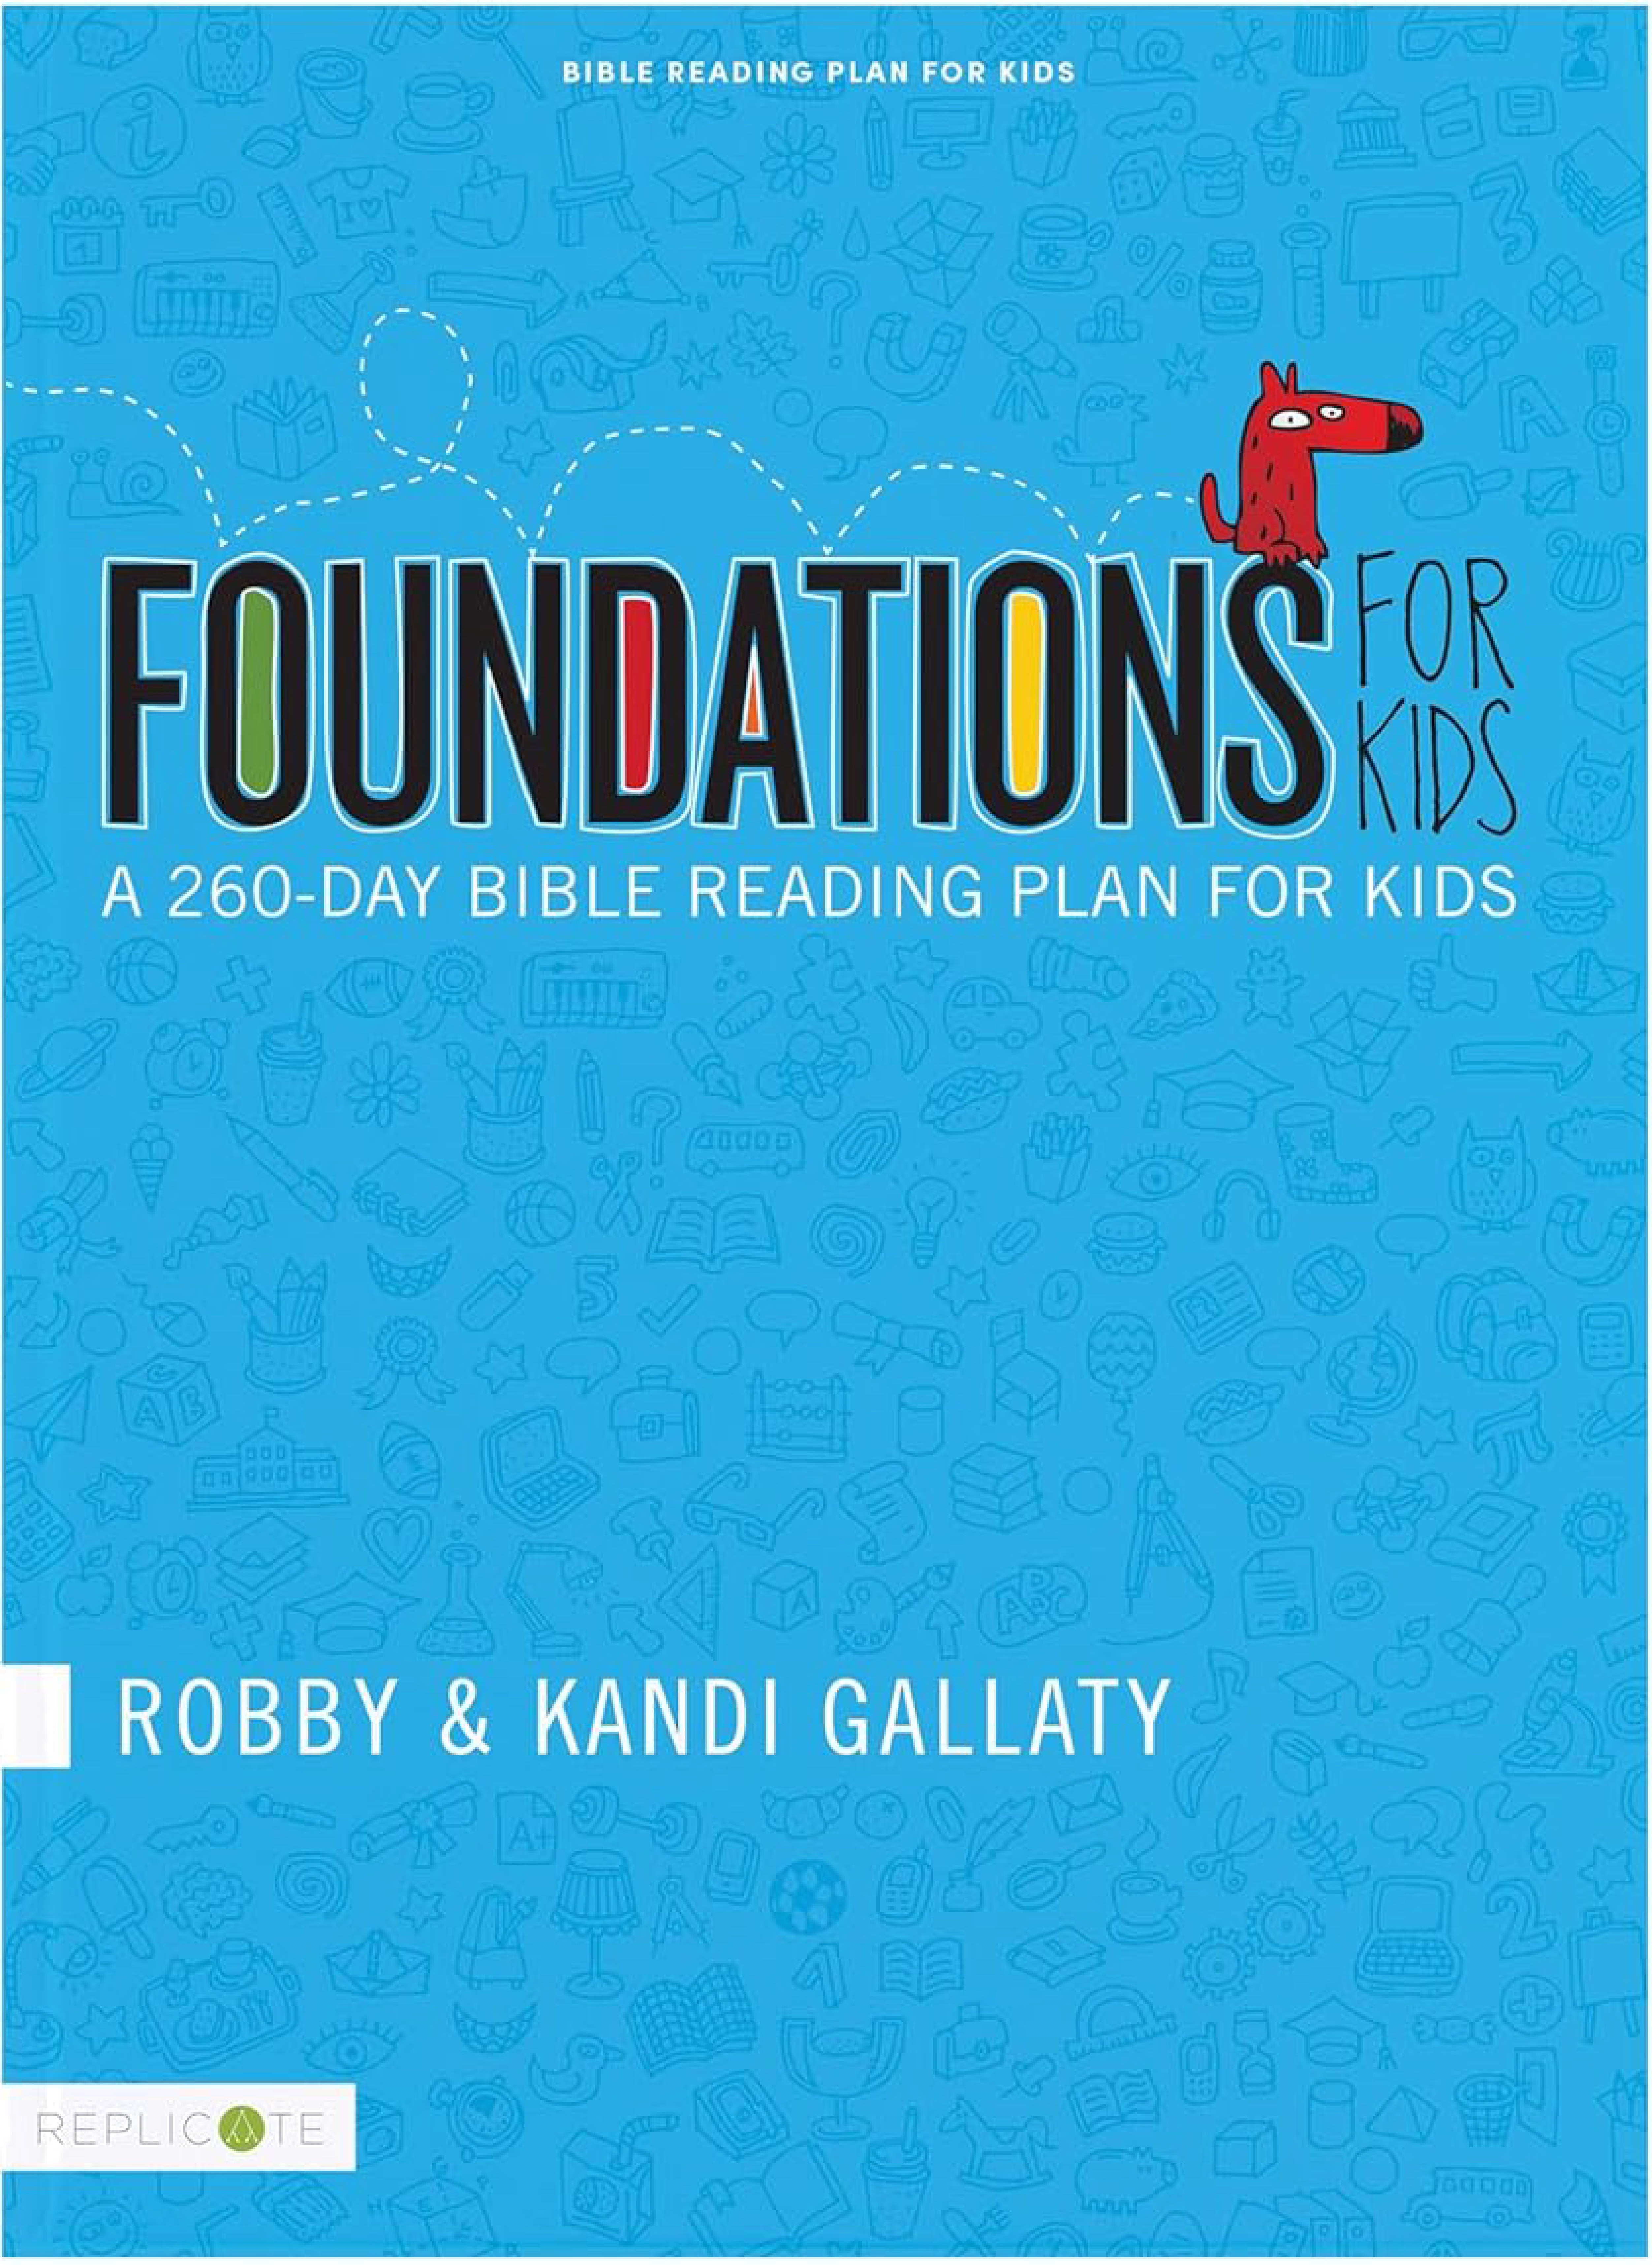 Foundations for Kids Book Cover